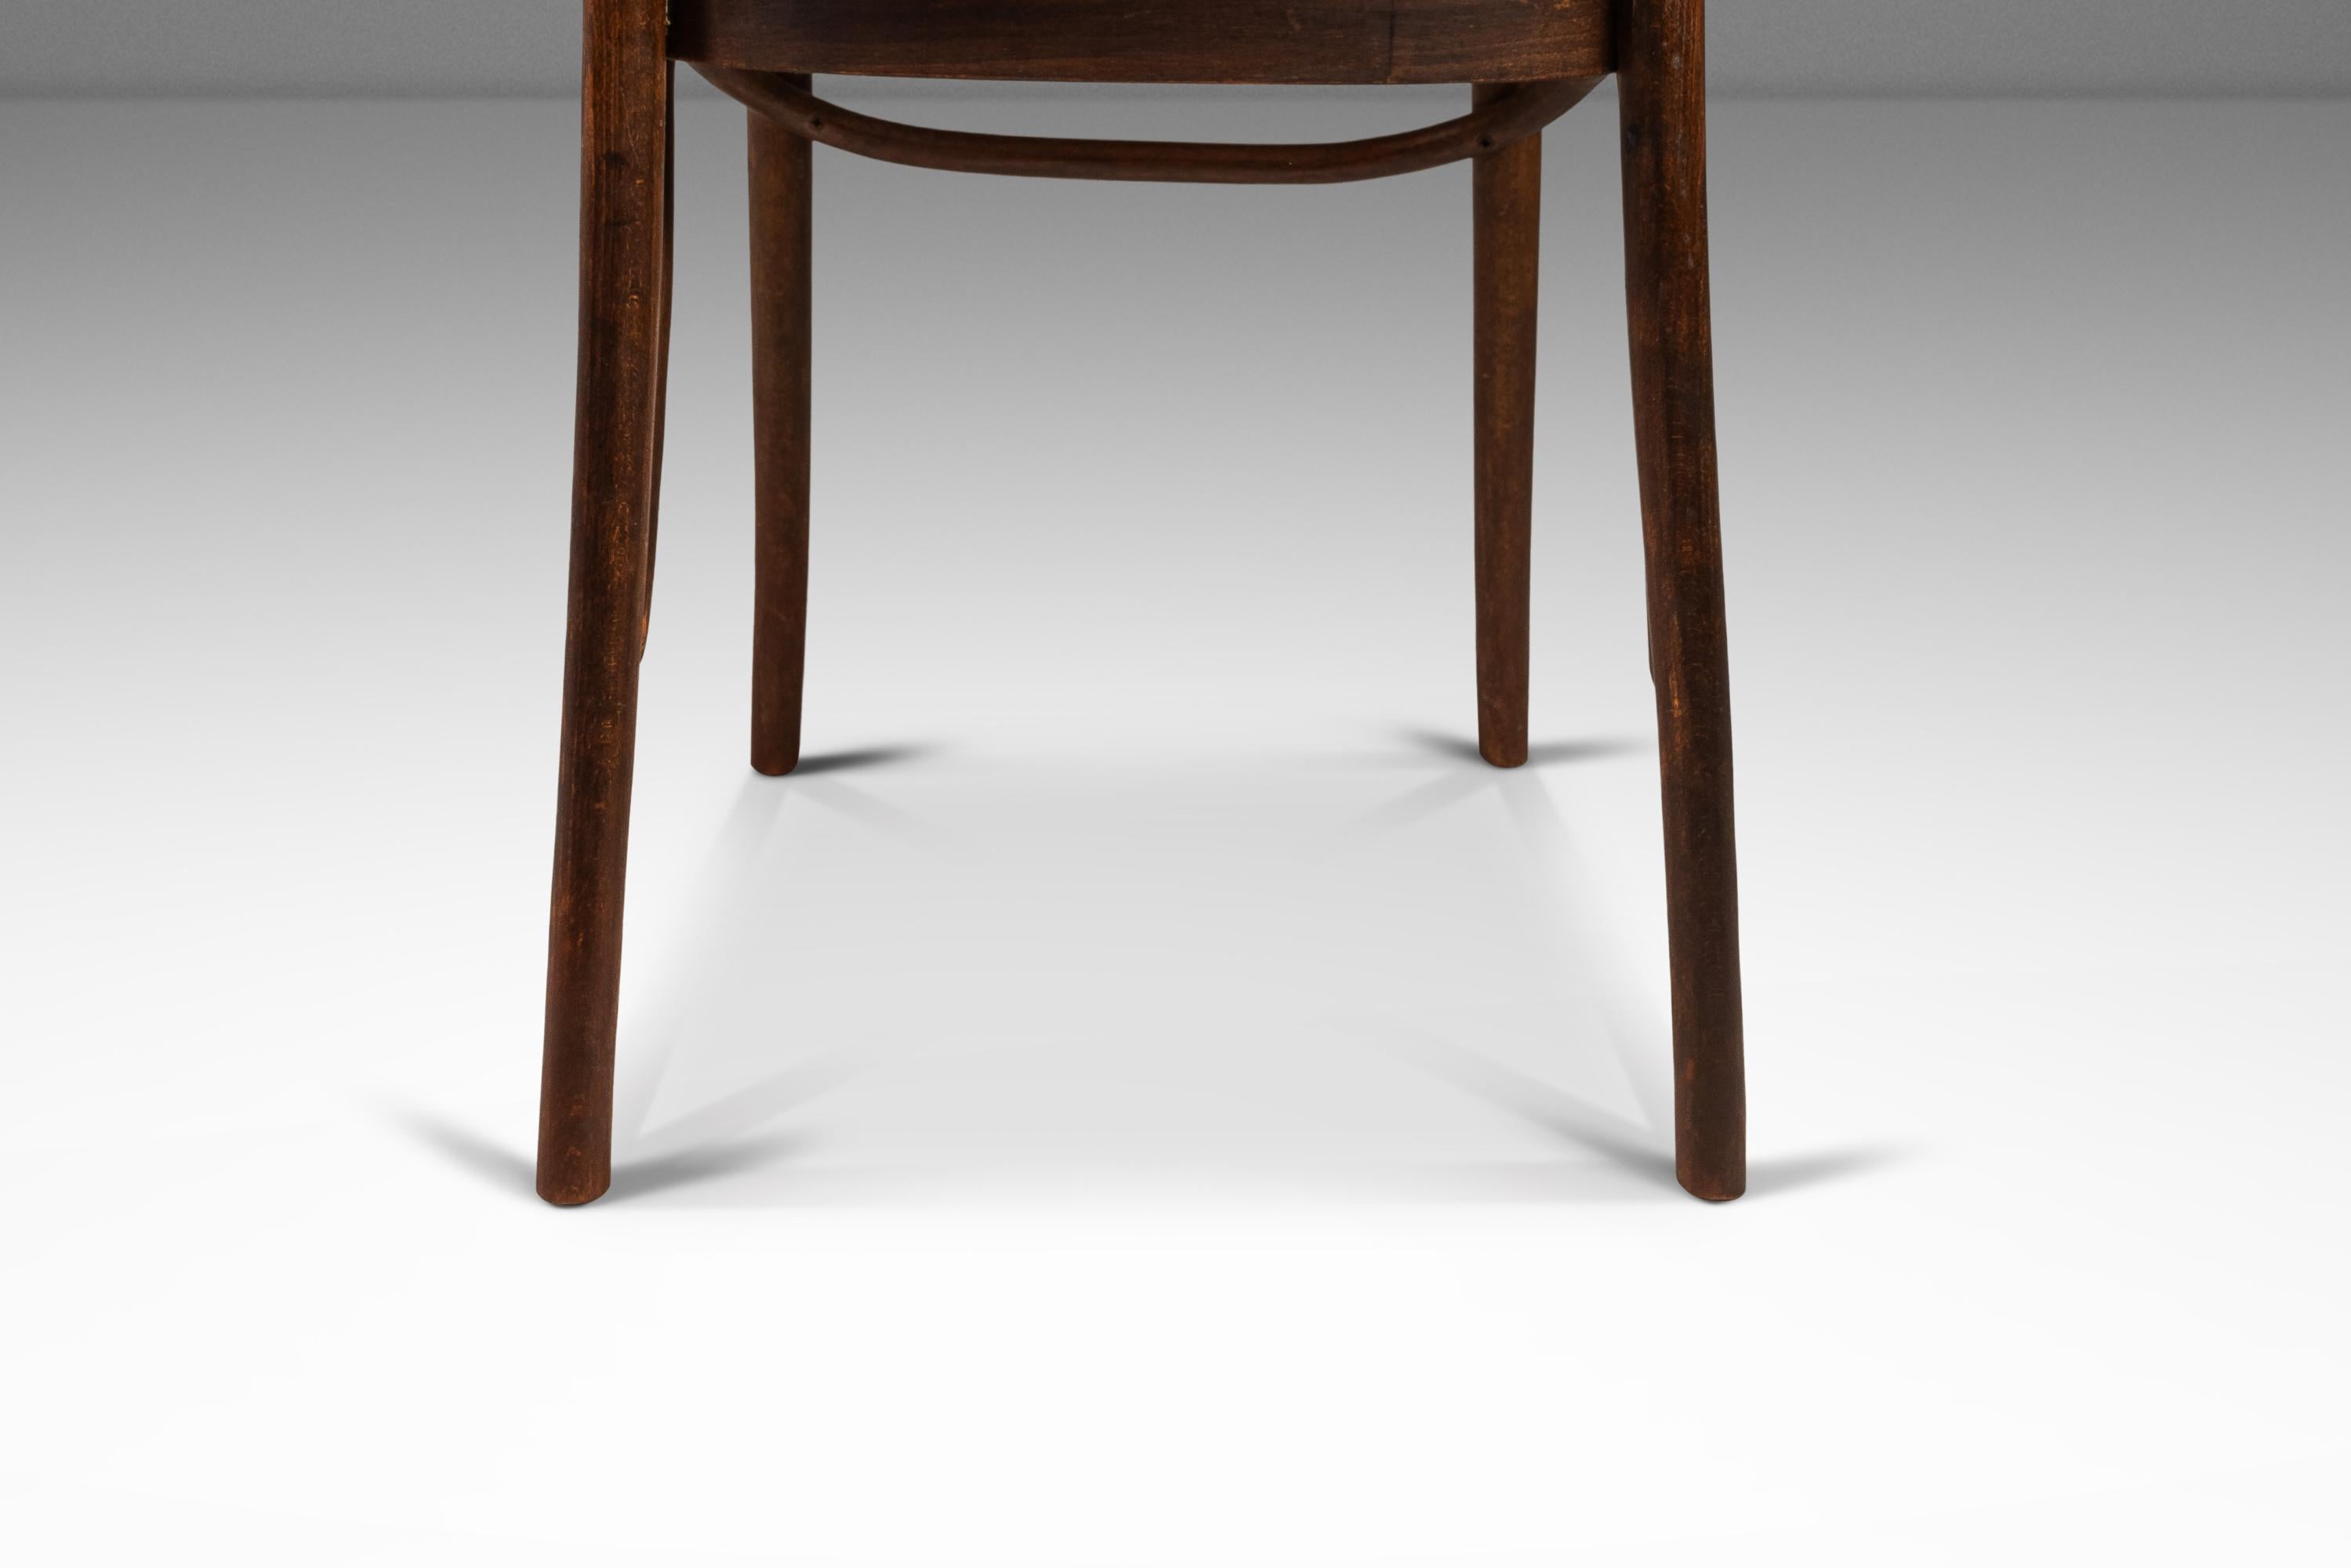 Bentwood Prague Model 811 Chair in Walnut by Josef Frank, Poland, c. 1960s For Sale 9